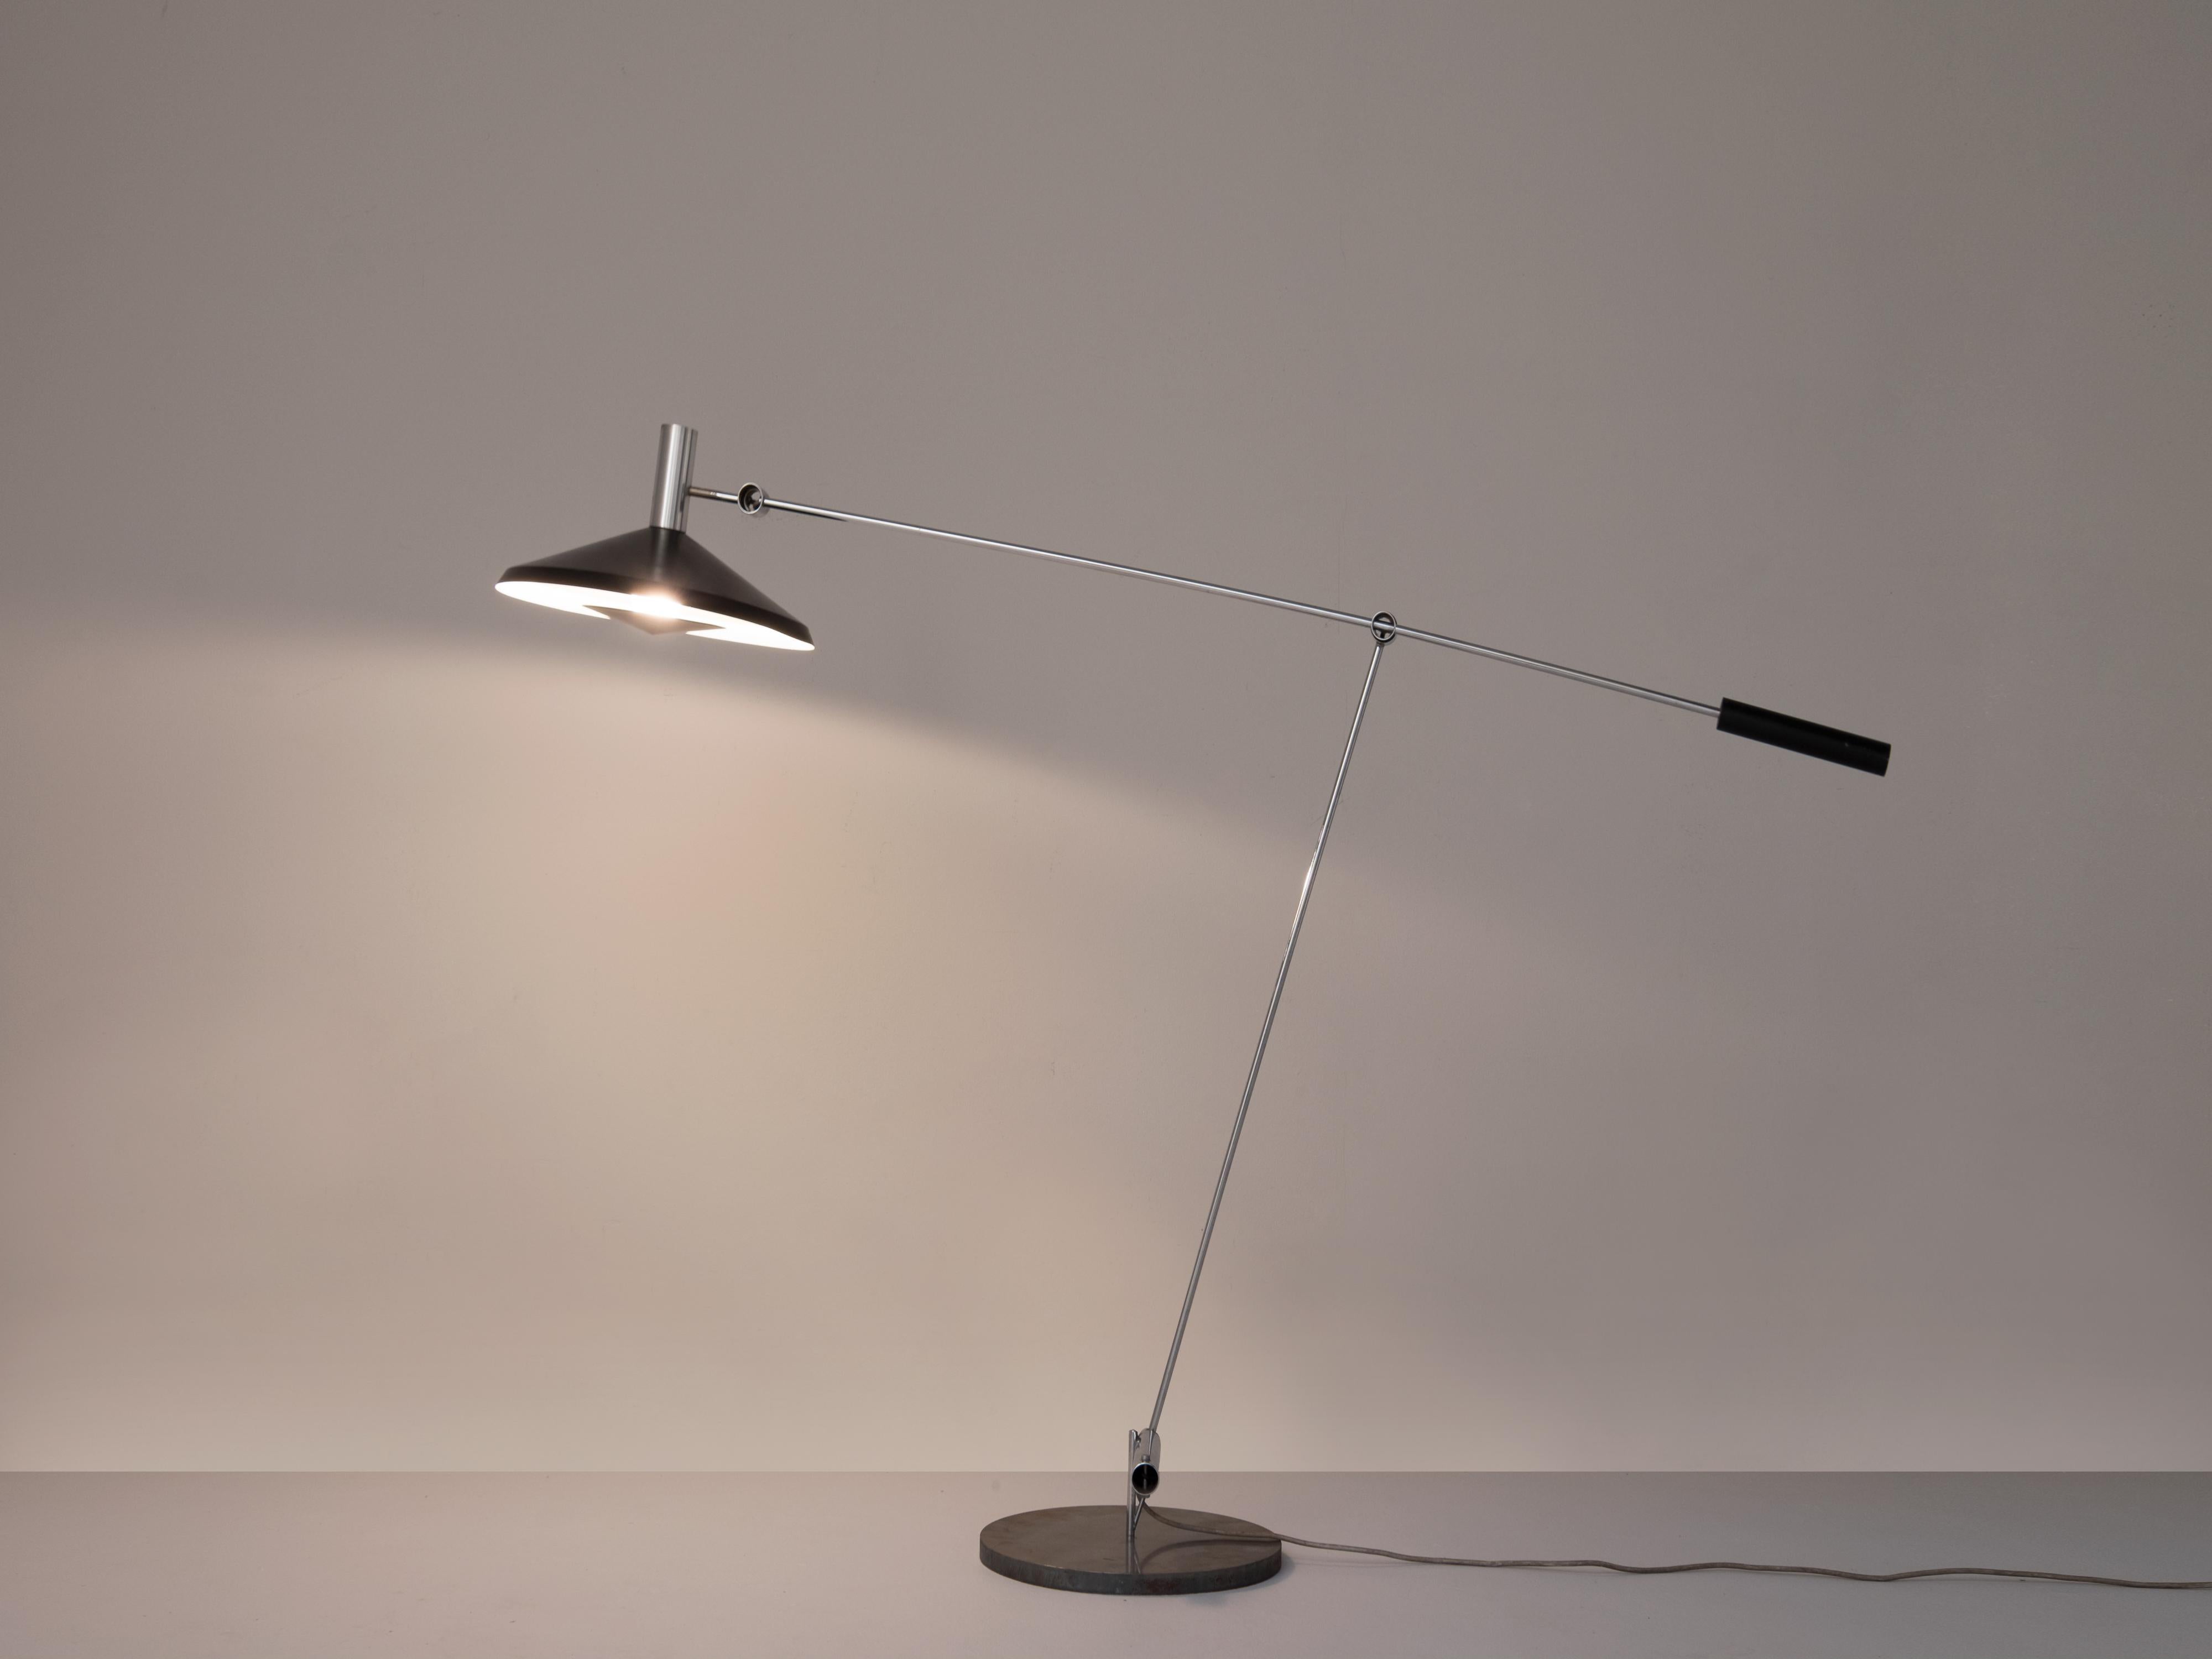 Rico & Rosemarie Baltensweiler, floor lamp model '600', metal, steel, Switzerland, 1950s. 

Refined Modernist floor lamp with counterweight, designed by the Swiss duo Rico & Rosemarie Baltensweiler. The floor lamp is manufactured in different